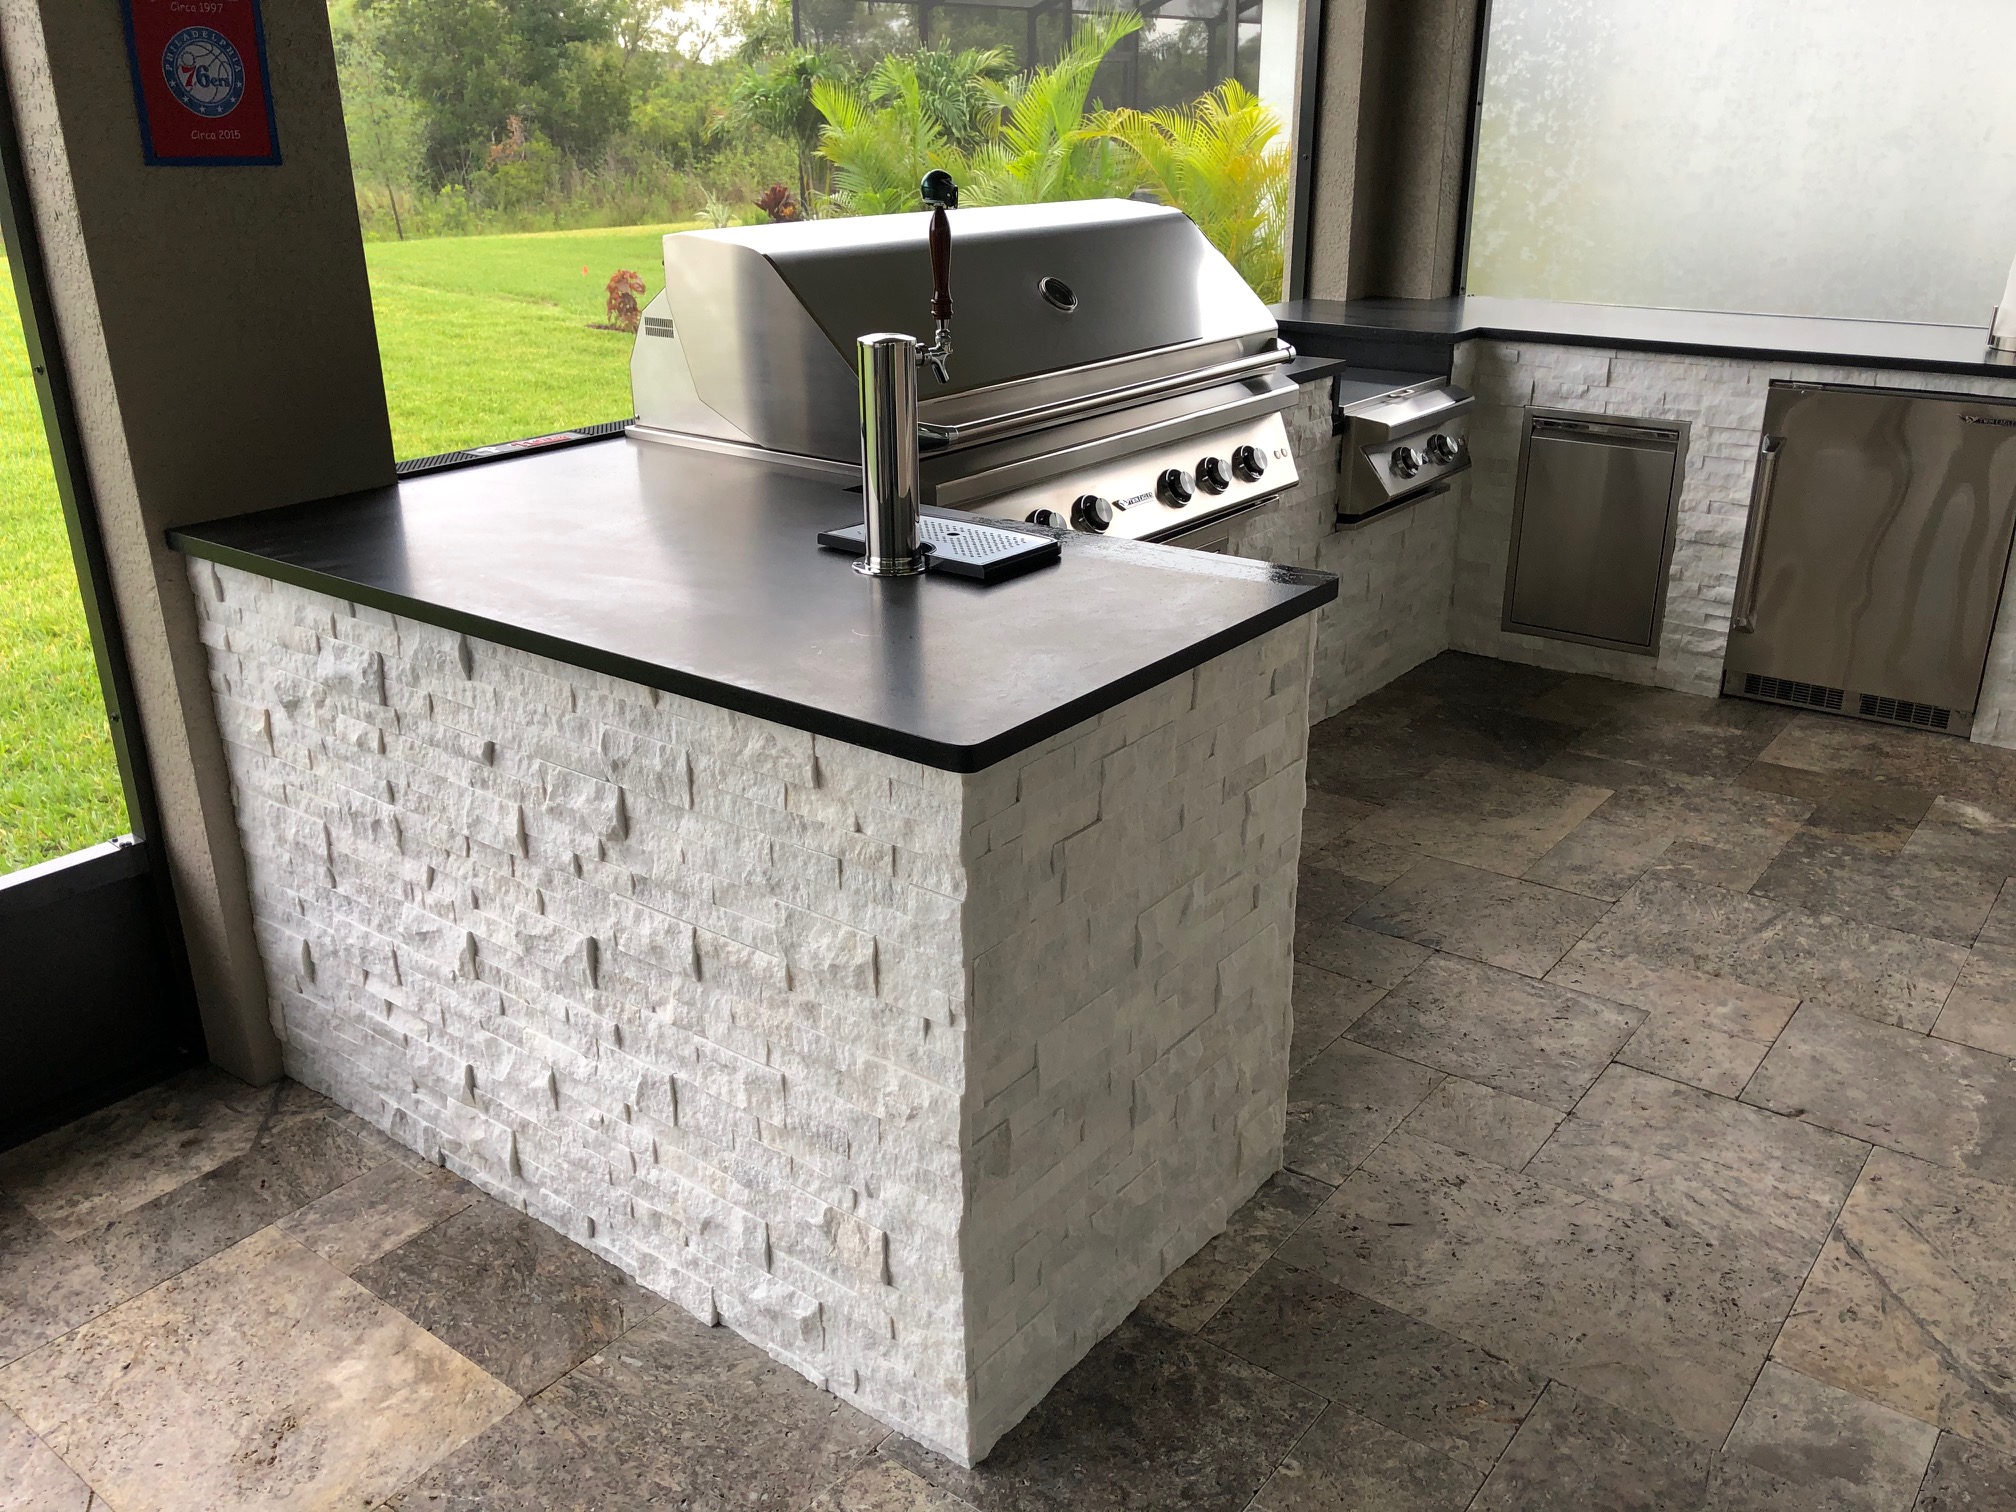 U-Shaped outdoor kitchen with kegerator